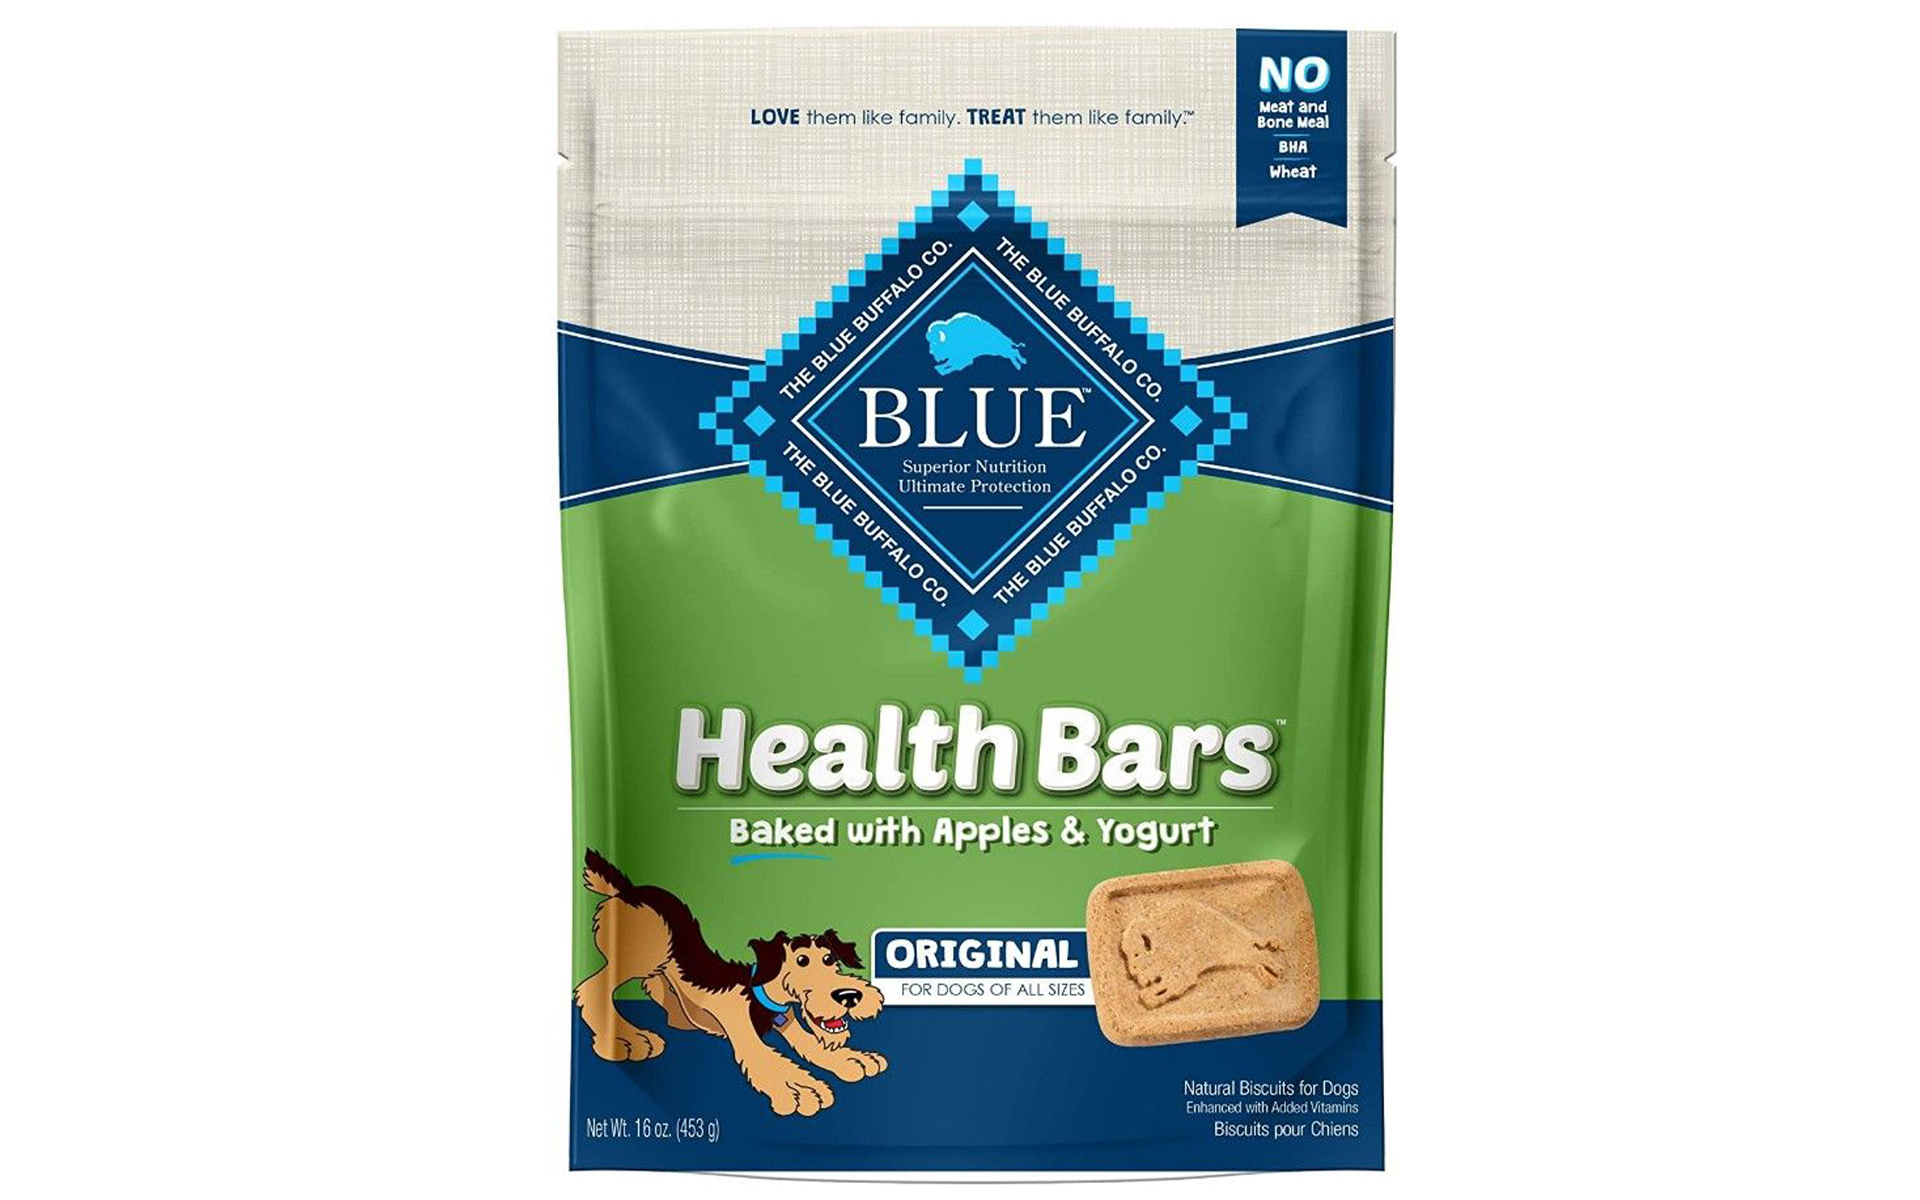 Health Bars Dog Biscuits - Baked with Apples & Yogurt, 16 oz